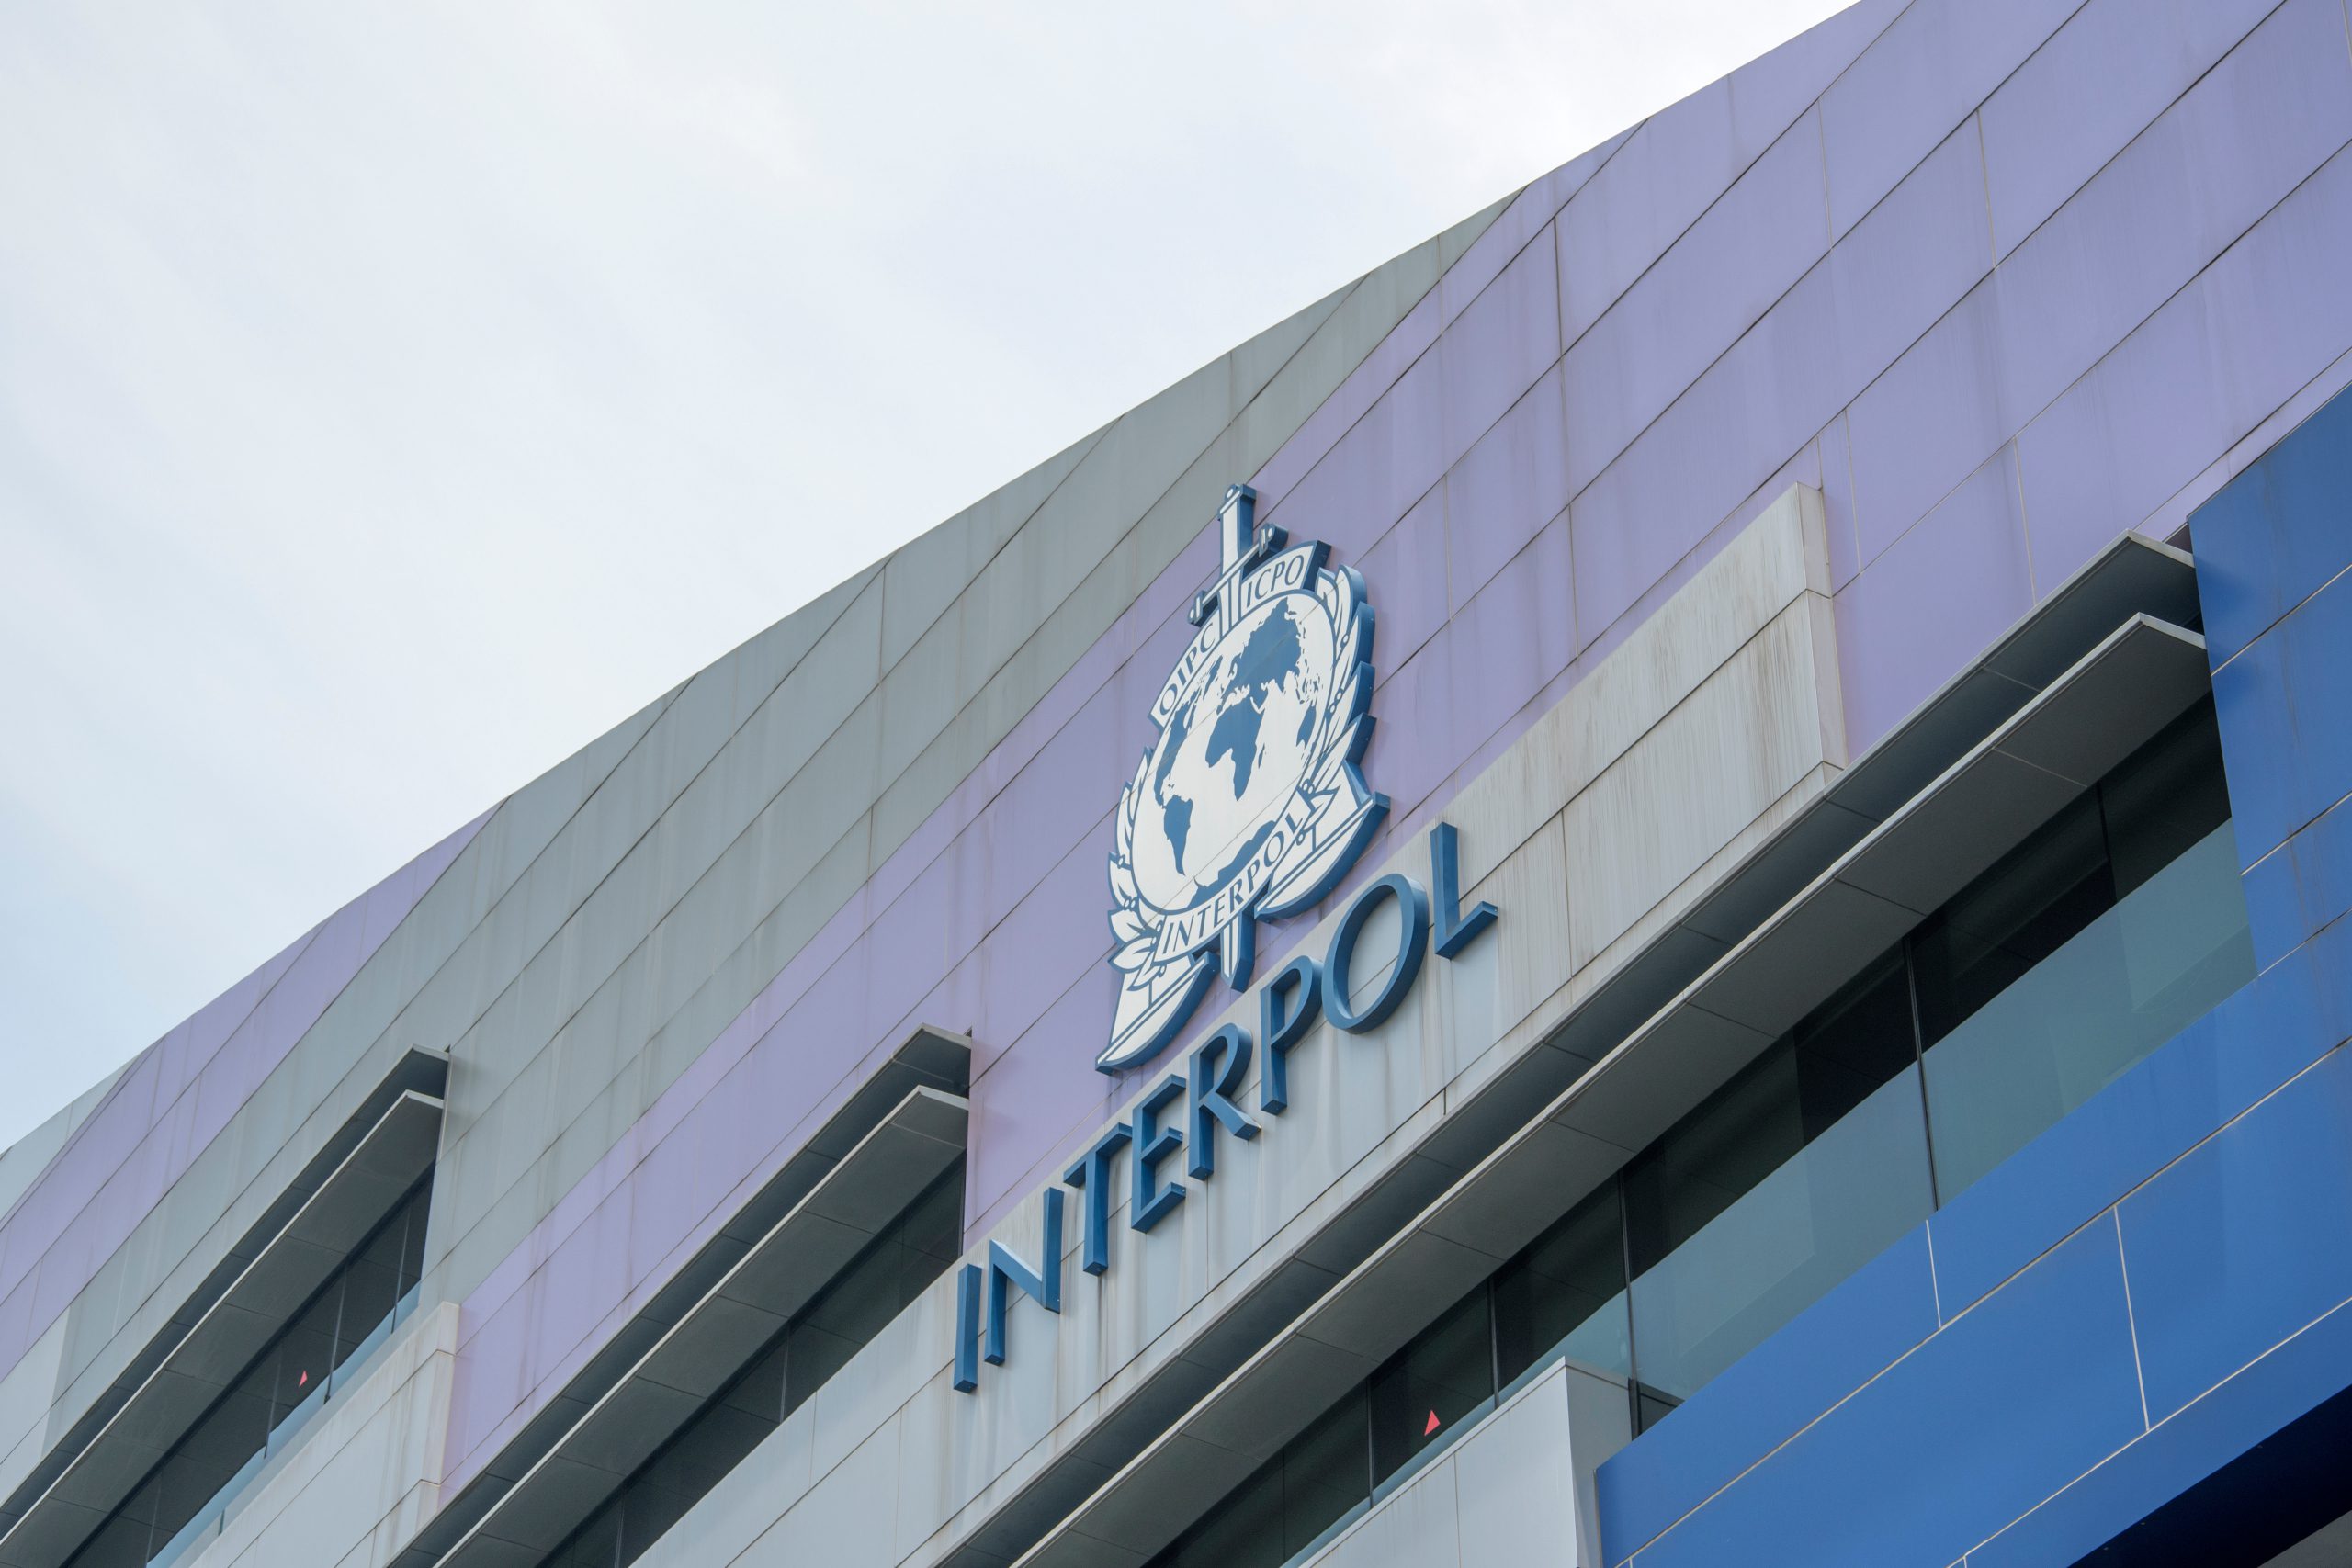 Terra founder Do Kwon makes “zero effort” to hide from Interpol
